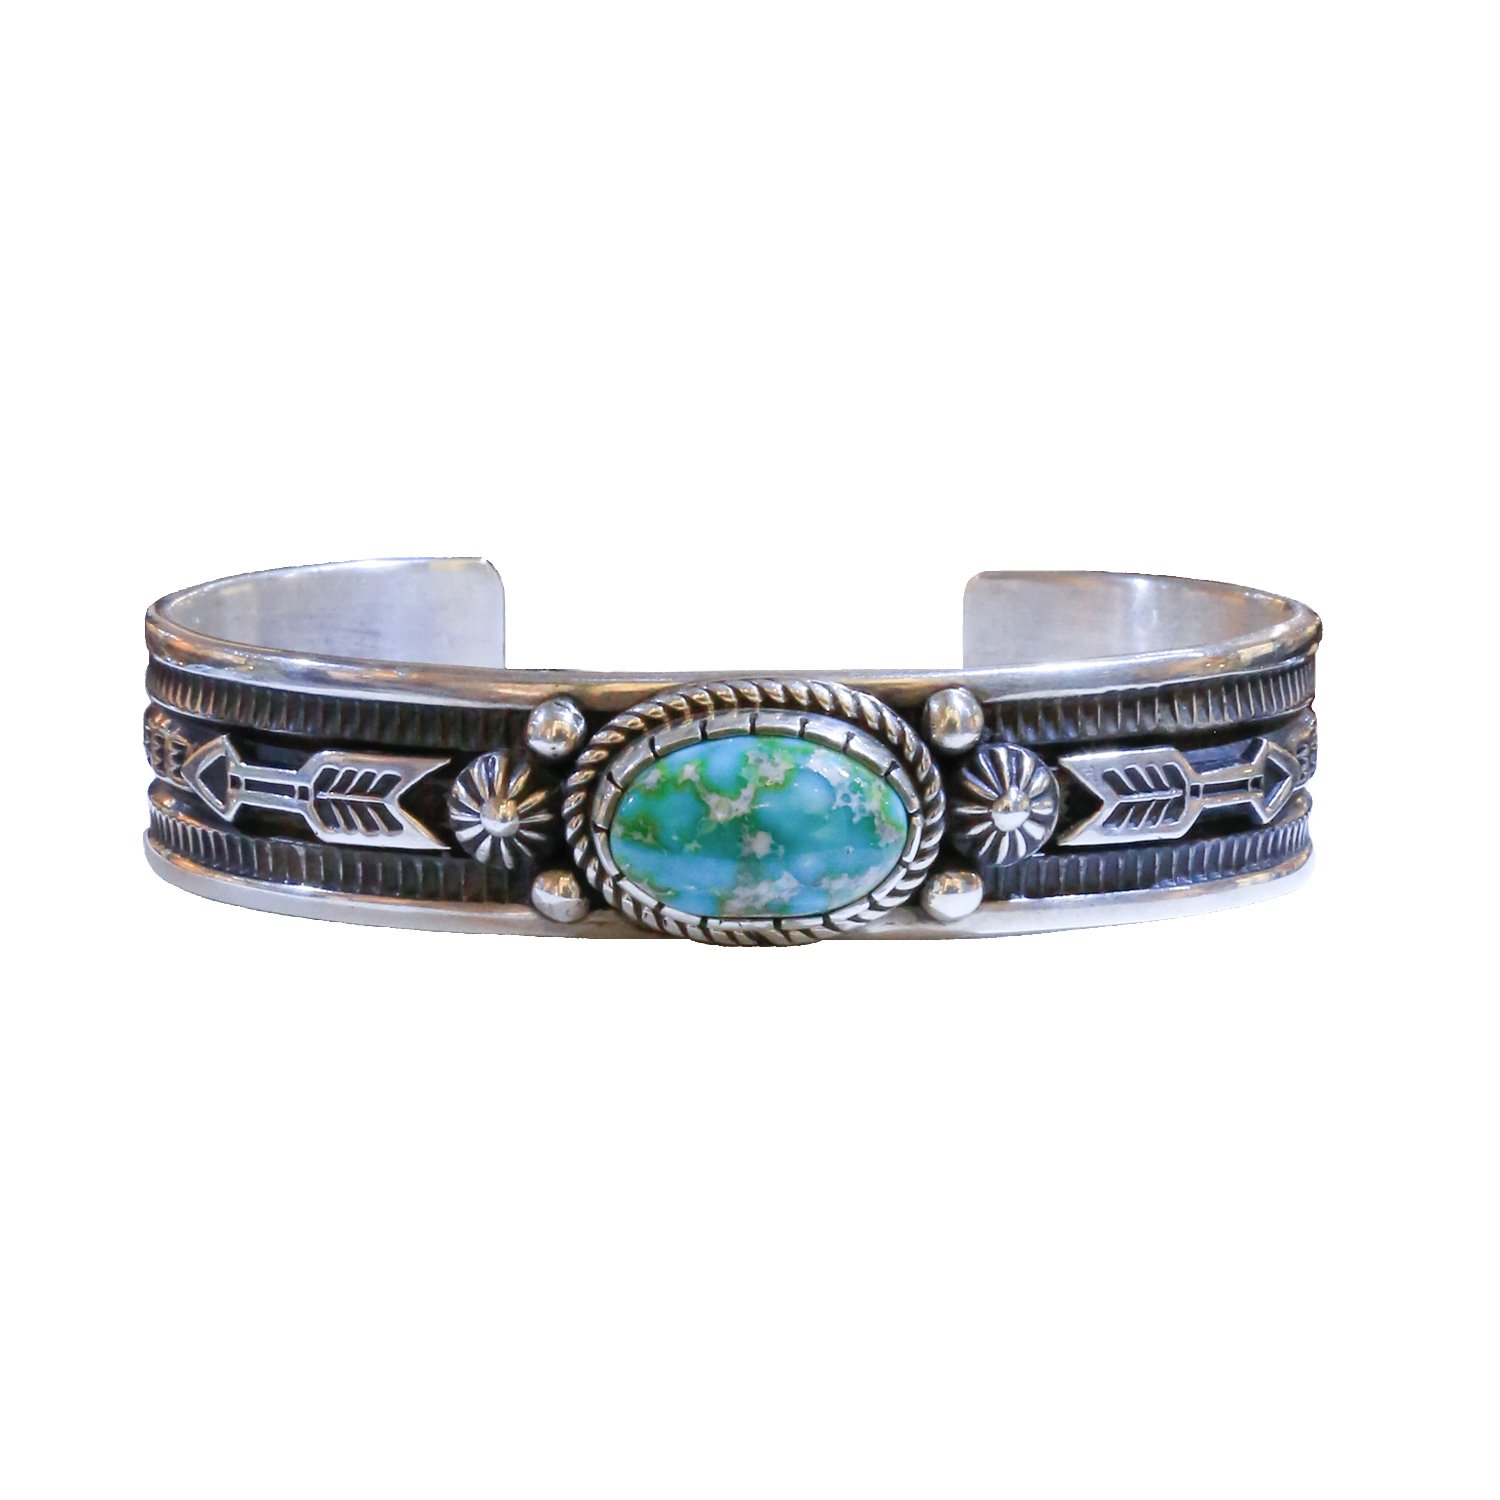 Sterling Navajo Indian Bone Cutter Cuff Bracelet with Carico Lake Turquoise